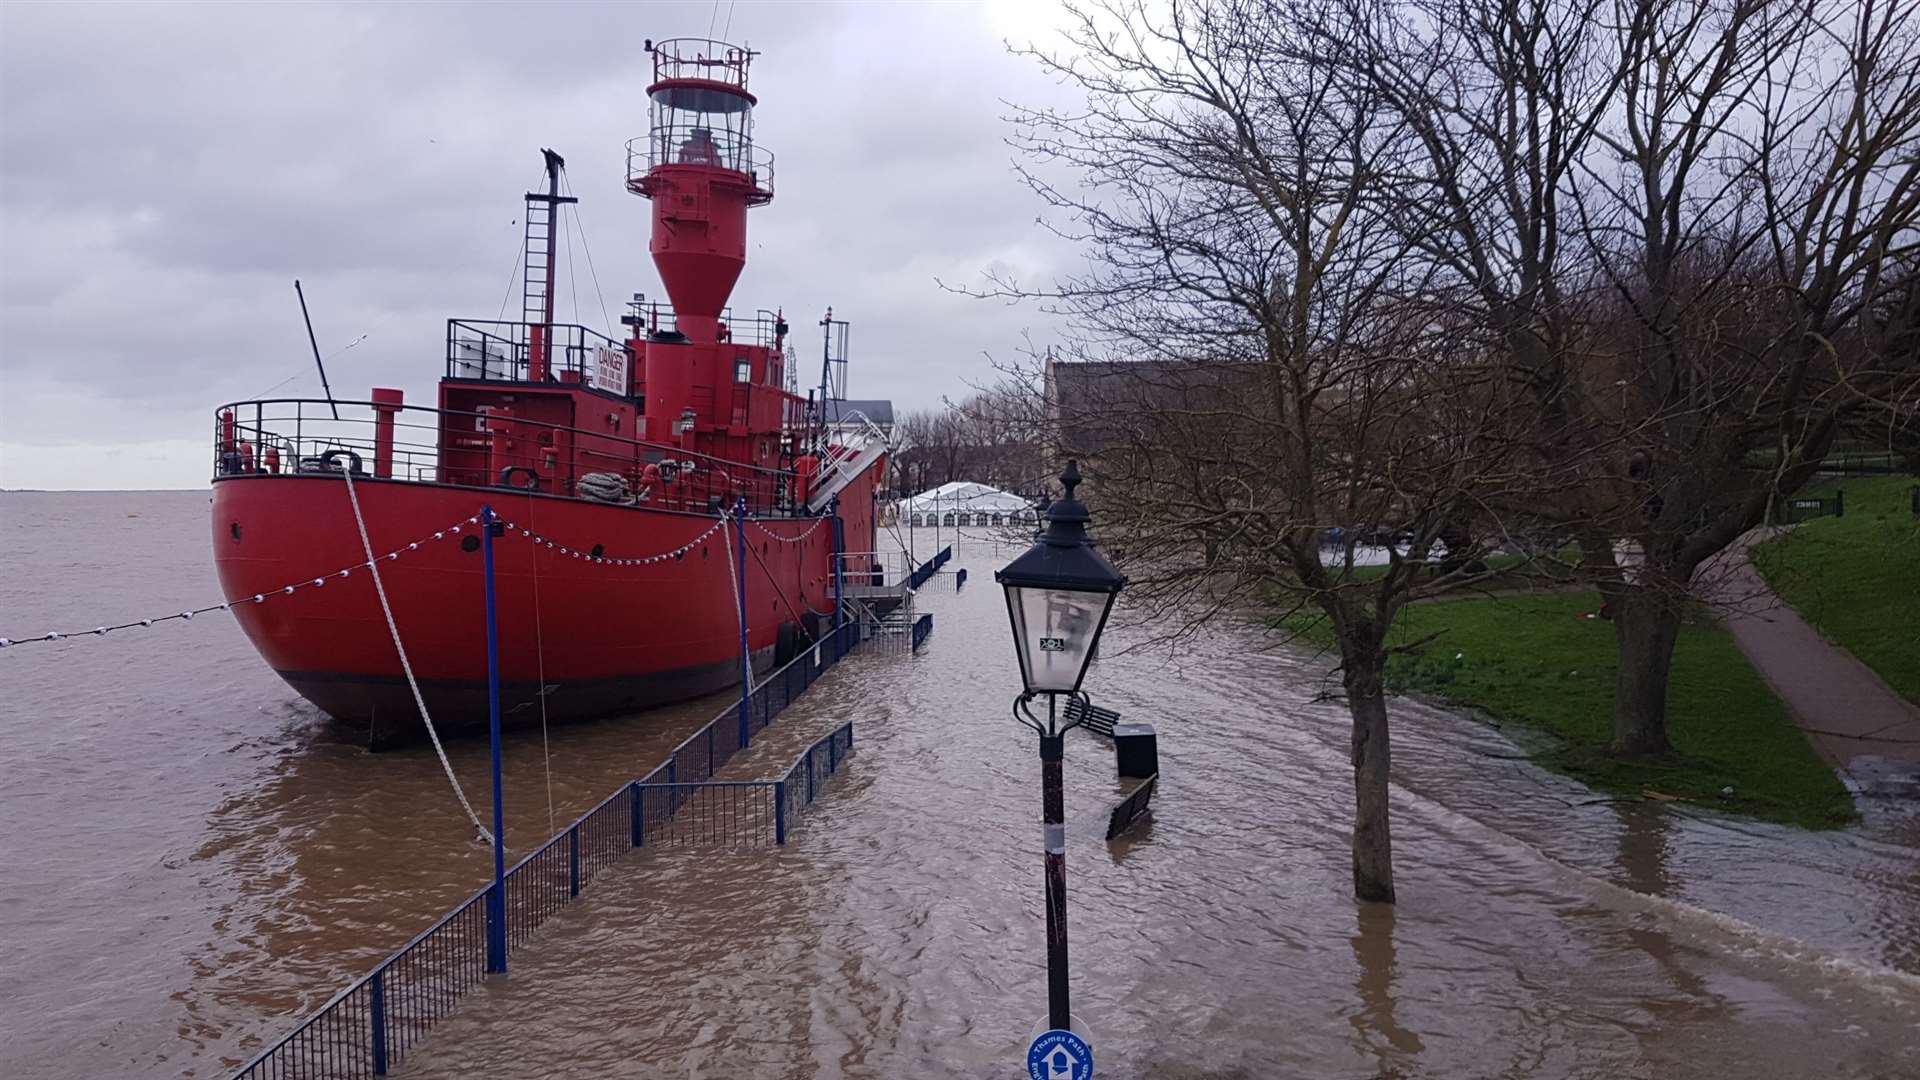 Large sections of Gravesend riverside have been hit by heavy flooding. Photo: Jason Arthur